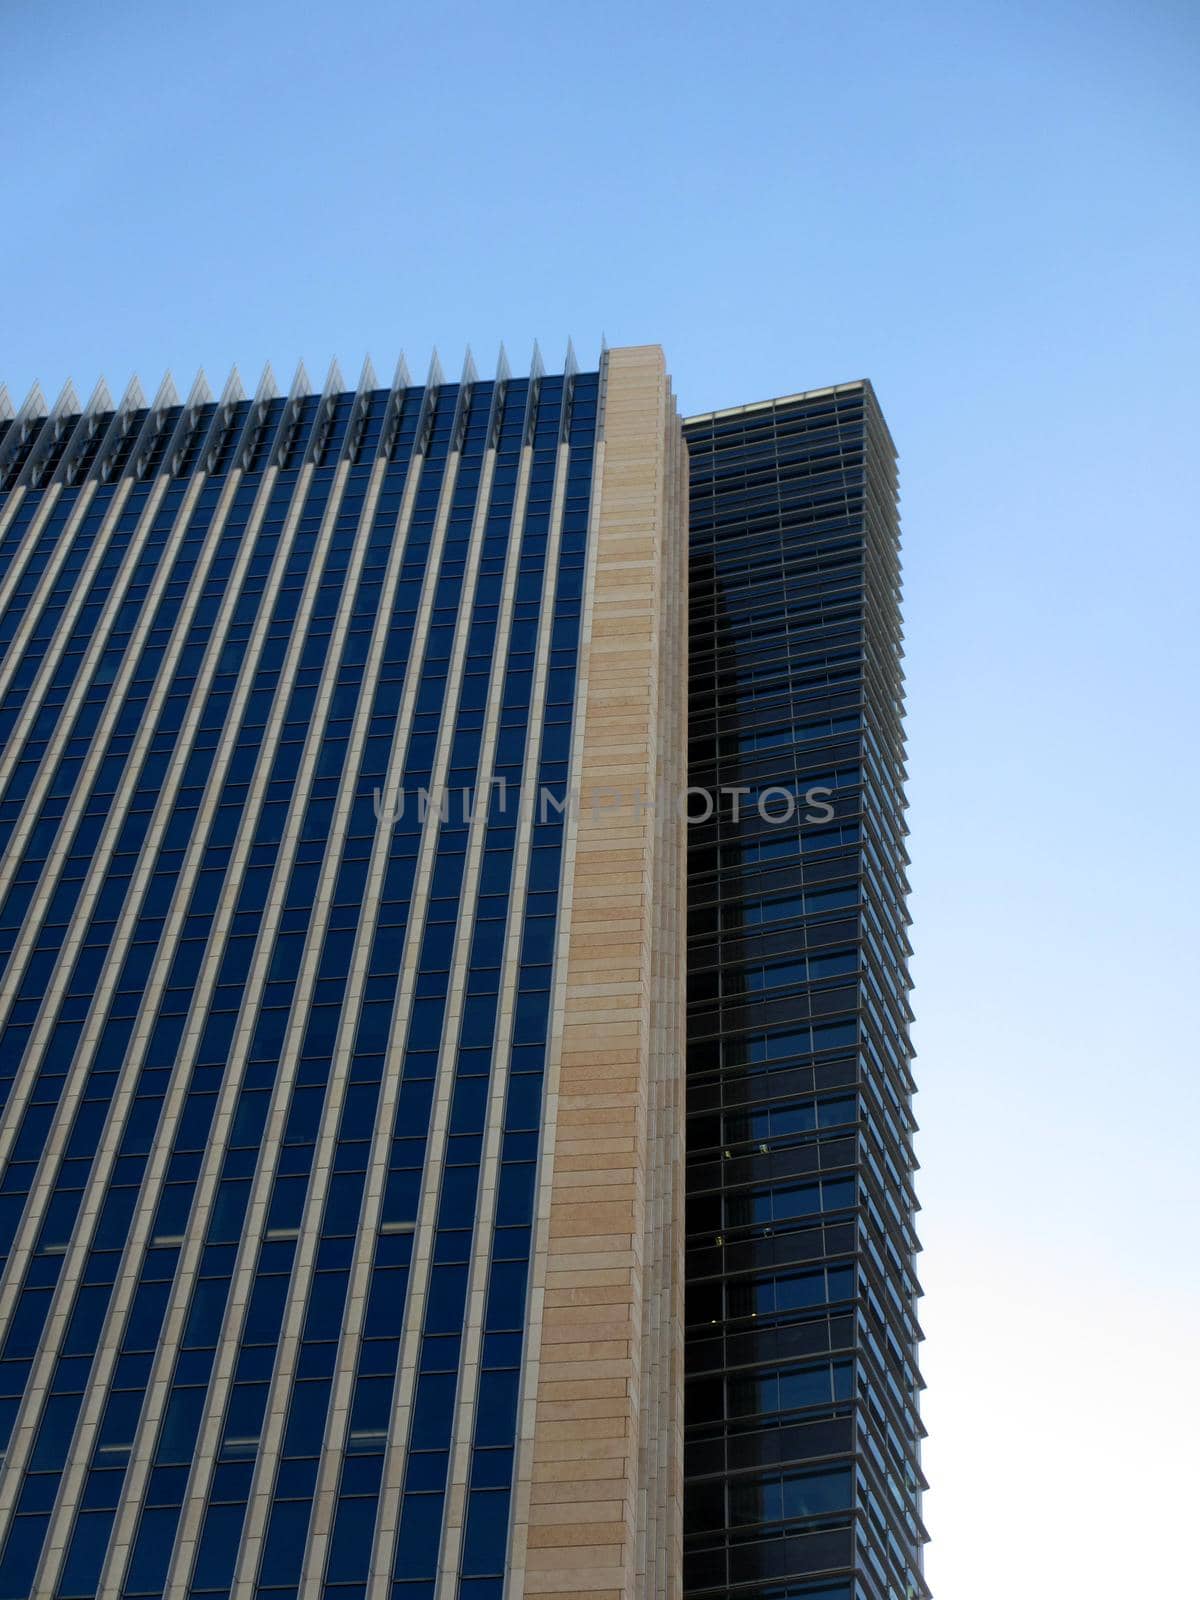 Side Angle of Modern Tall Building with a blue sky.